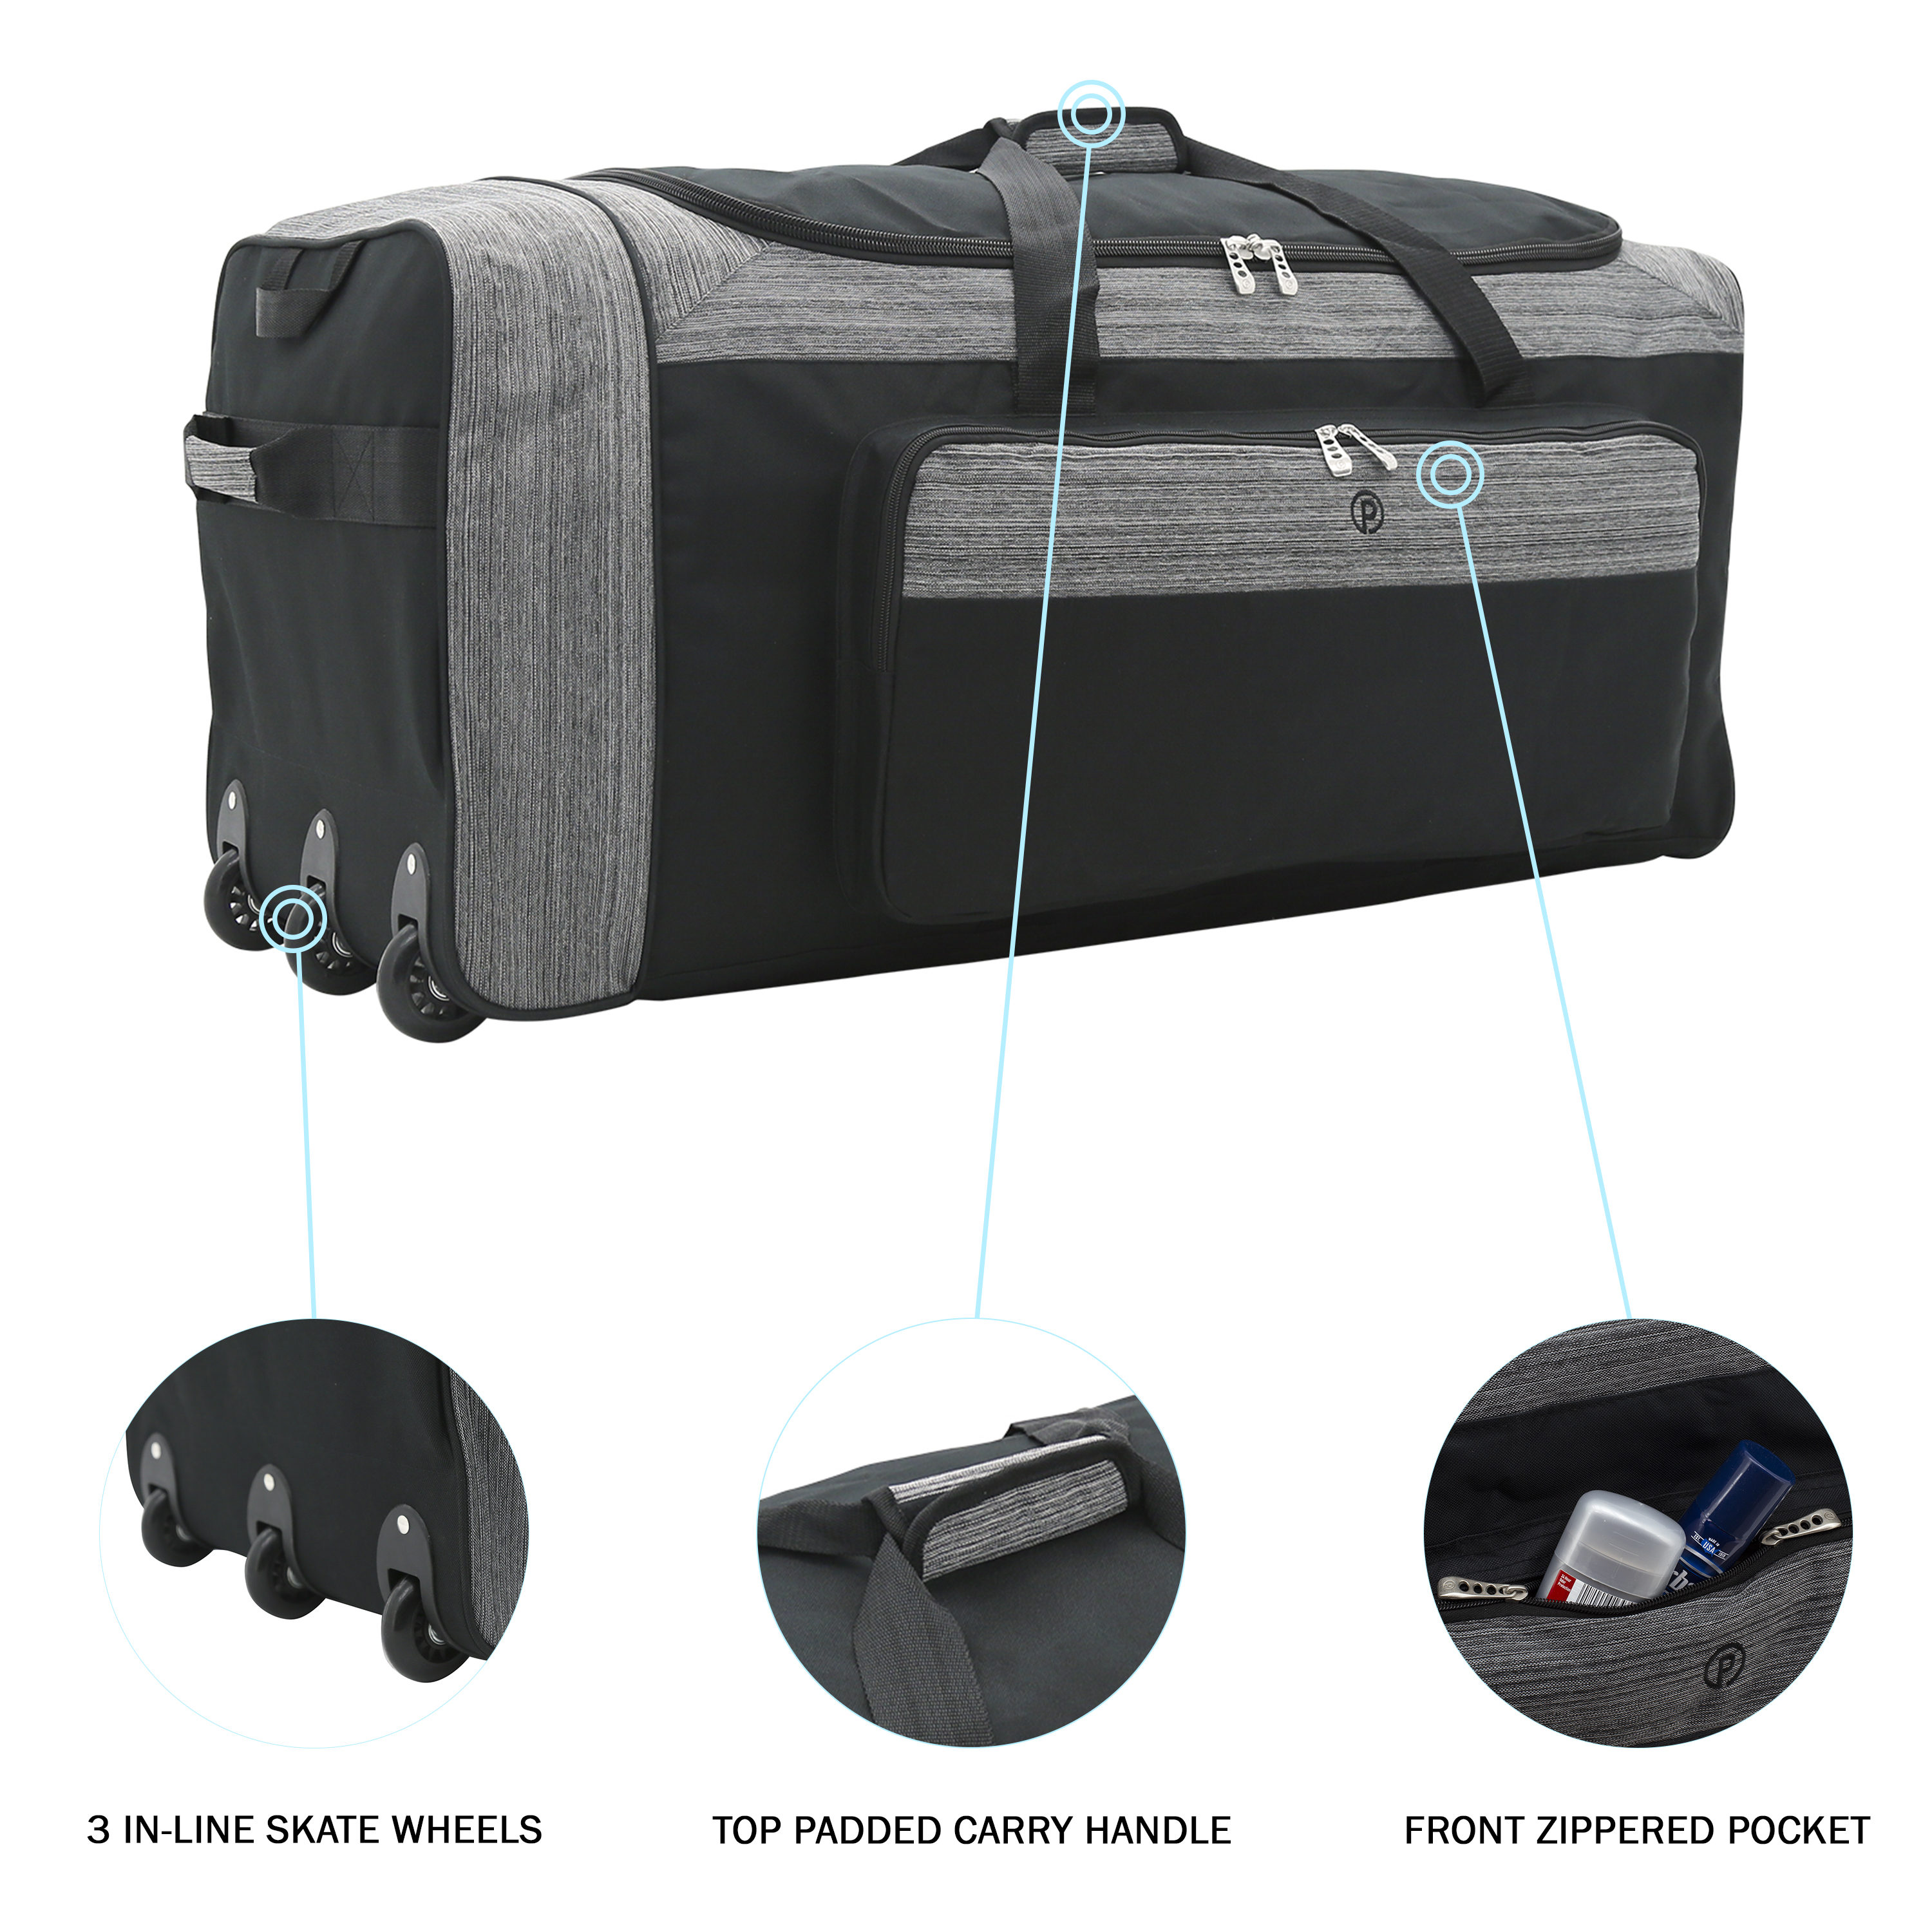 Protege 36" Tri-Fold Polyester Rolling Trunk Duffel for Travel (Walmart Exclusive) - image 3 of 8